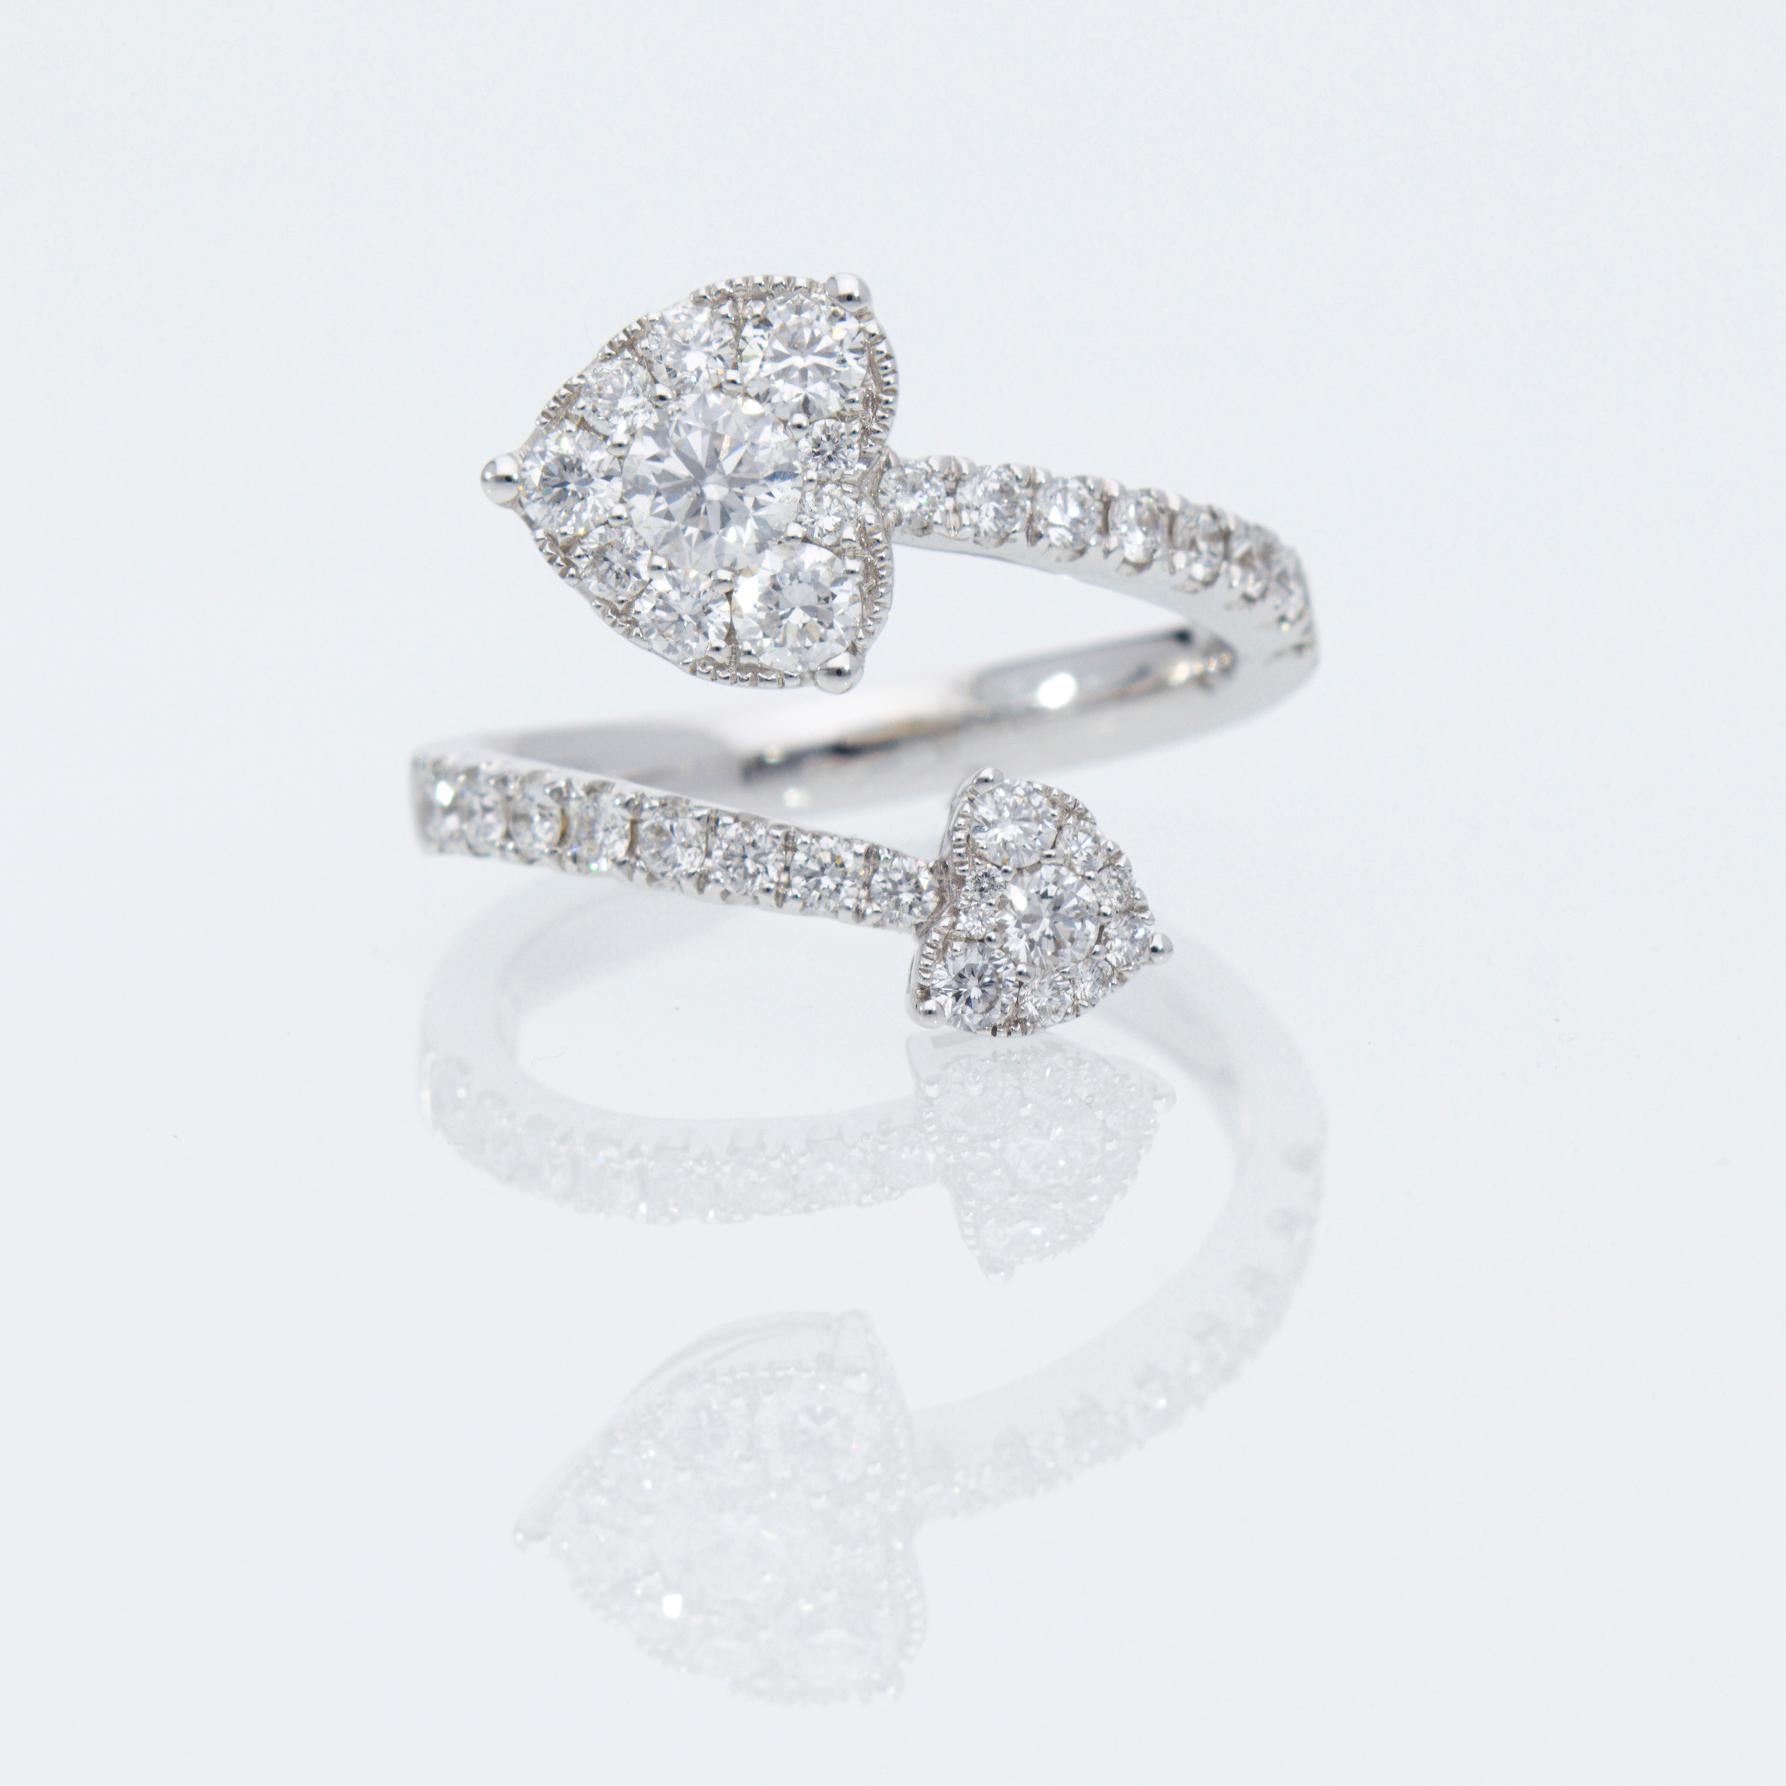 Brilliant Cut Contrarié Ring with Hearts with Ct 1.08 of Diamonds, 18 Kt White Gold For Sale